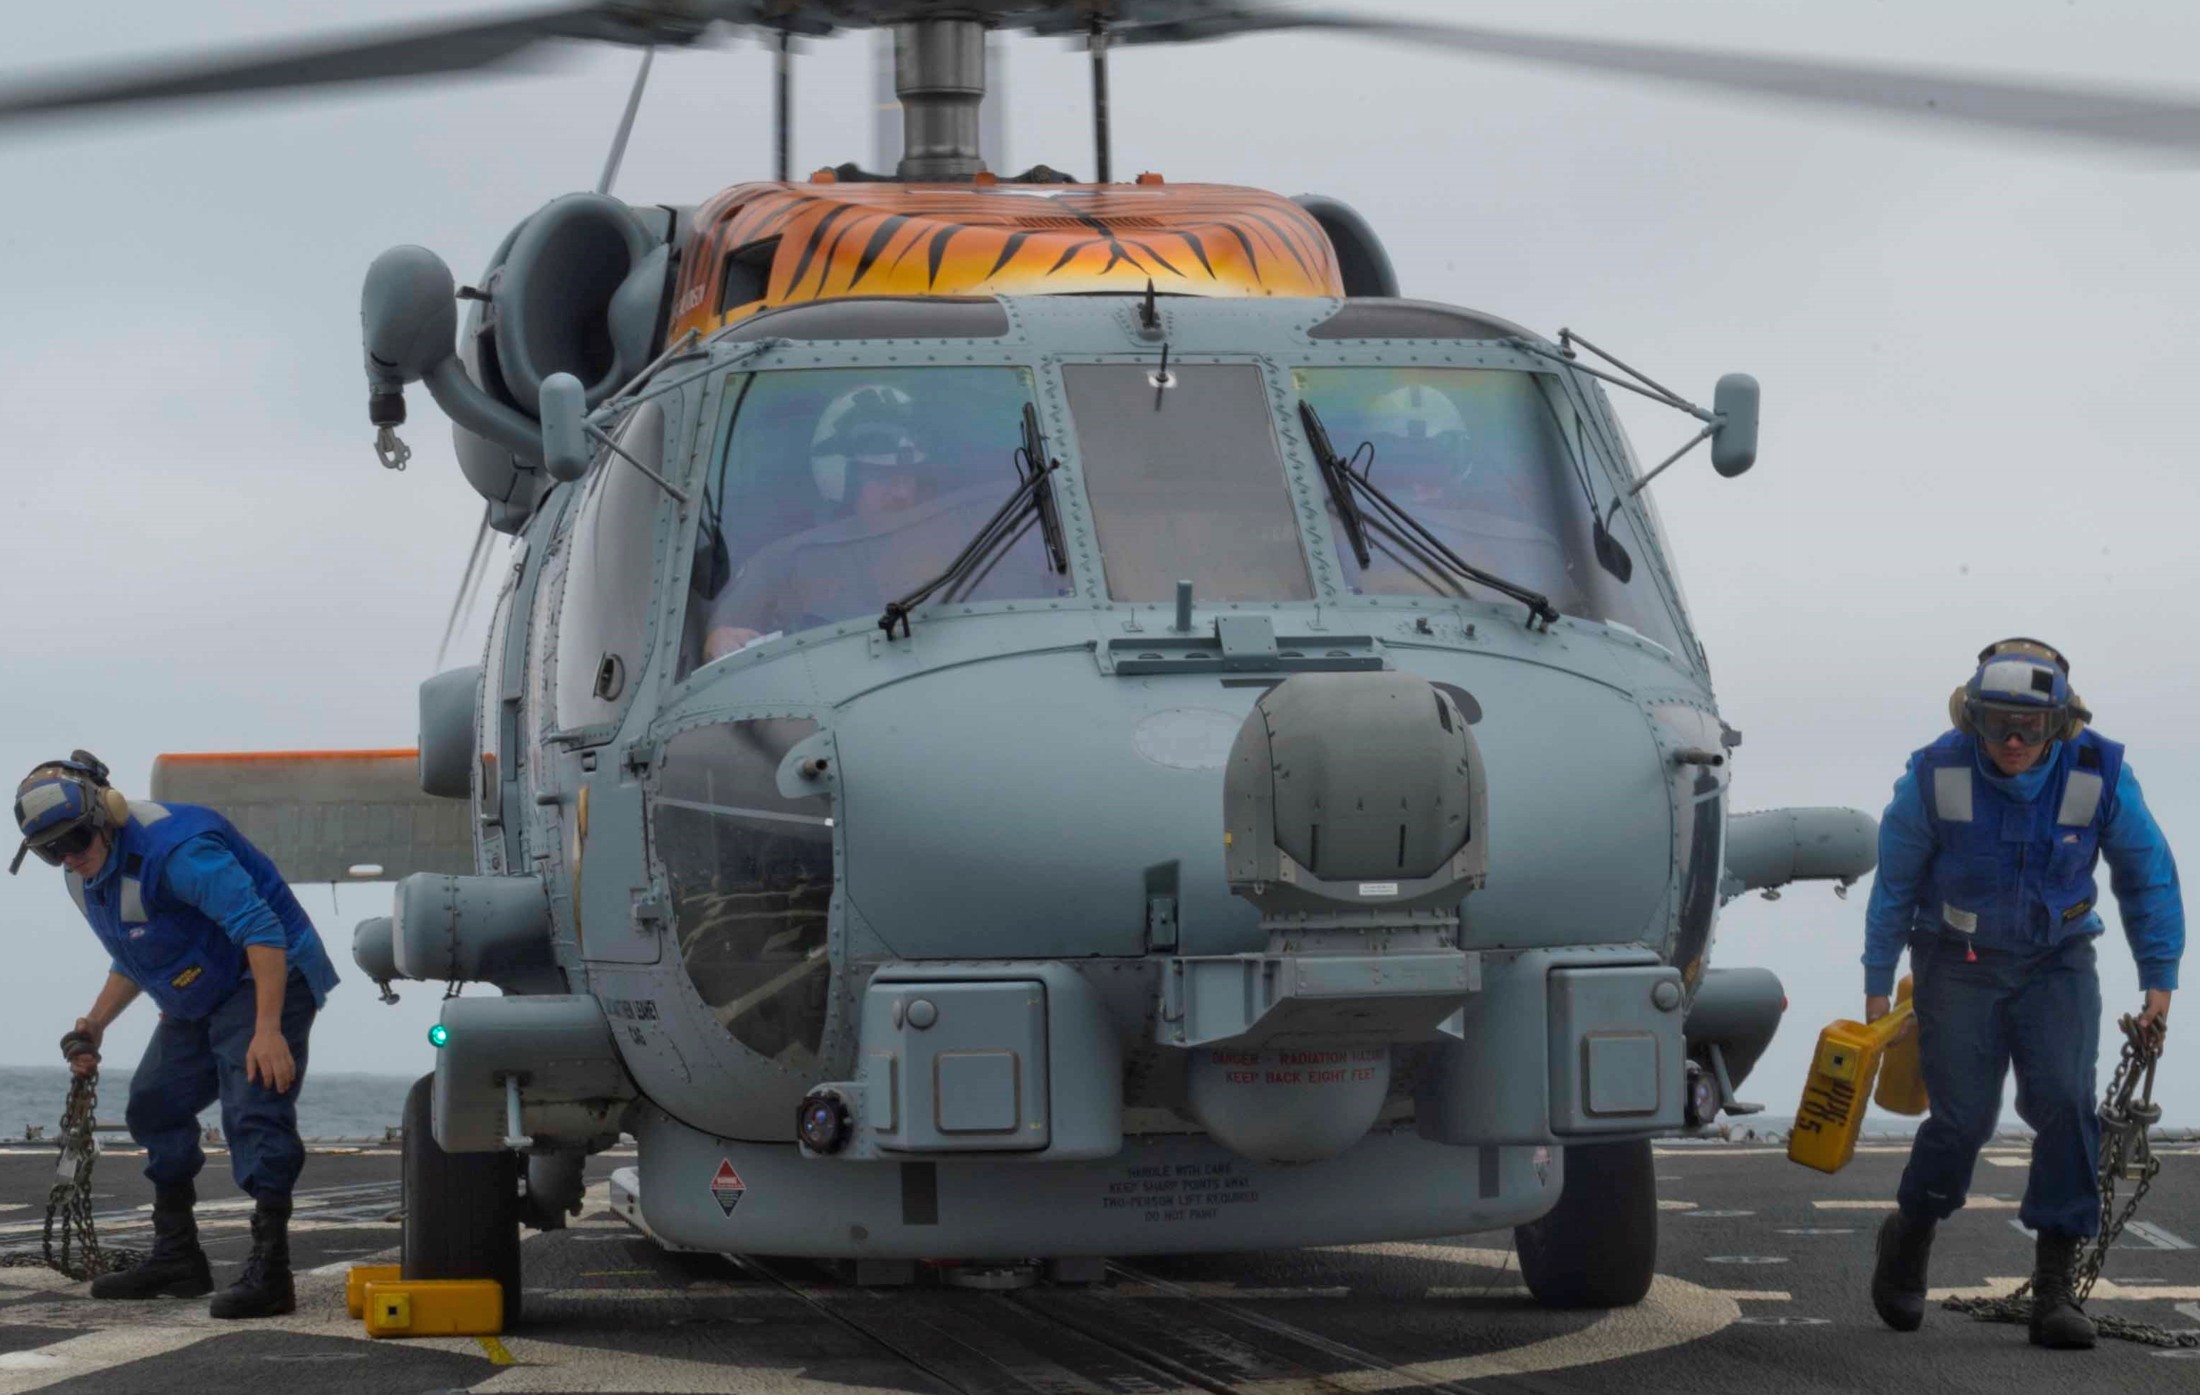 hsm-73 battlecats helicopter maritime strike squadron us navy mh-60r seahawk 2014 20